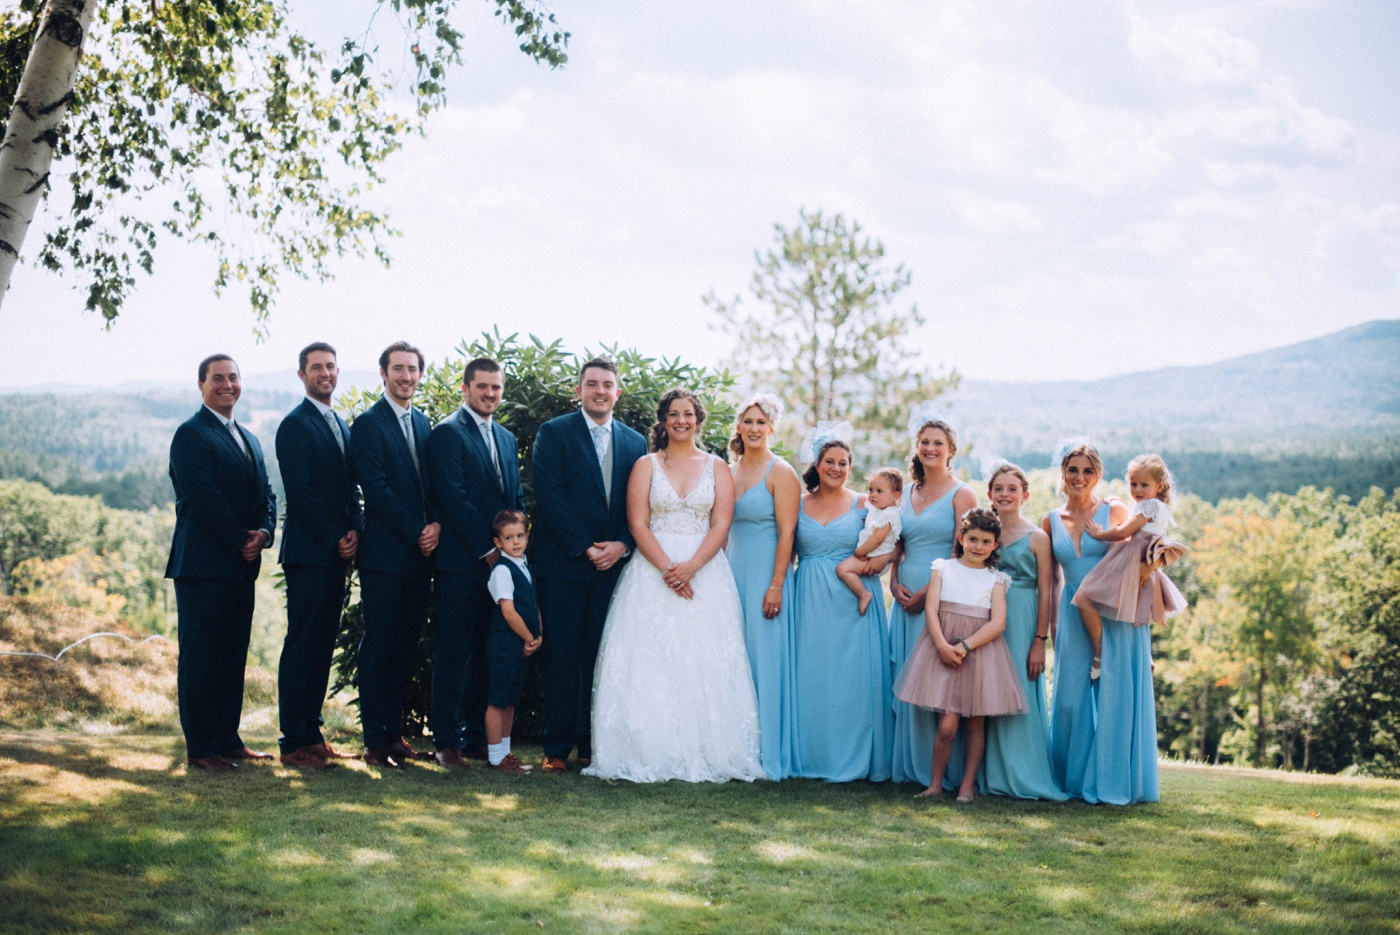 Bridal party portraits on the property of a private home in Deering, NH